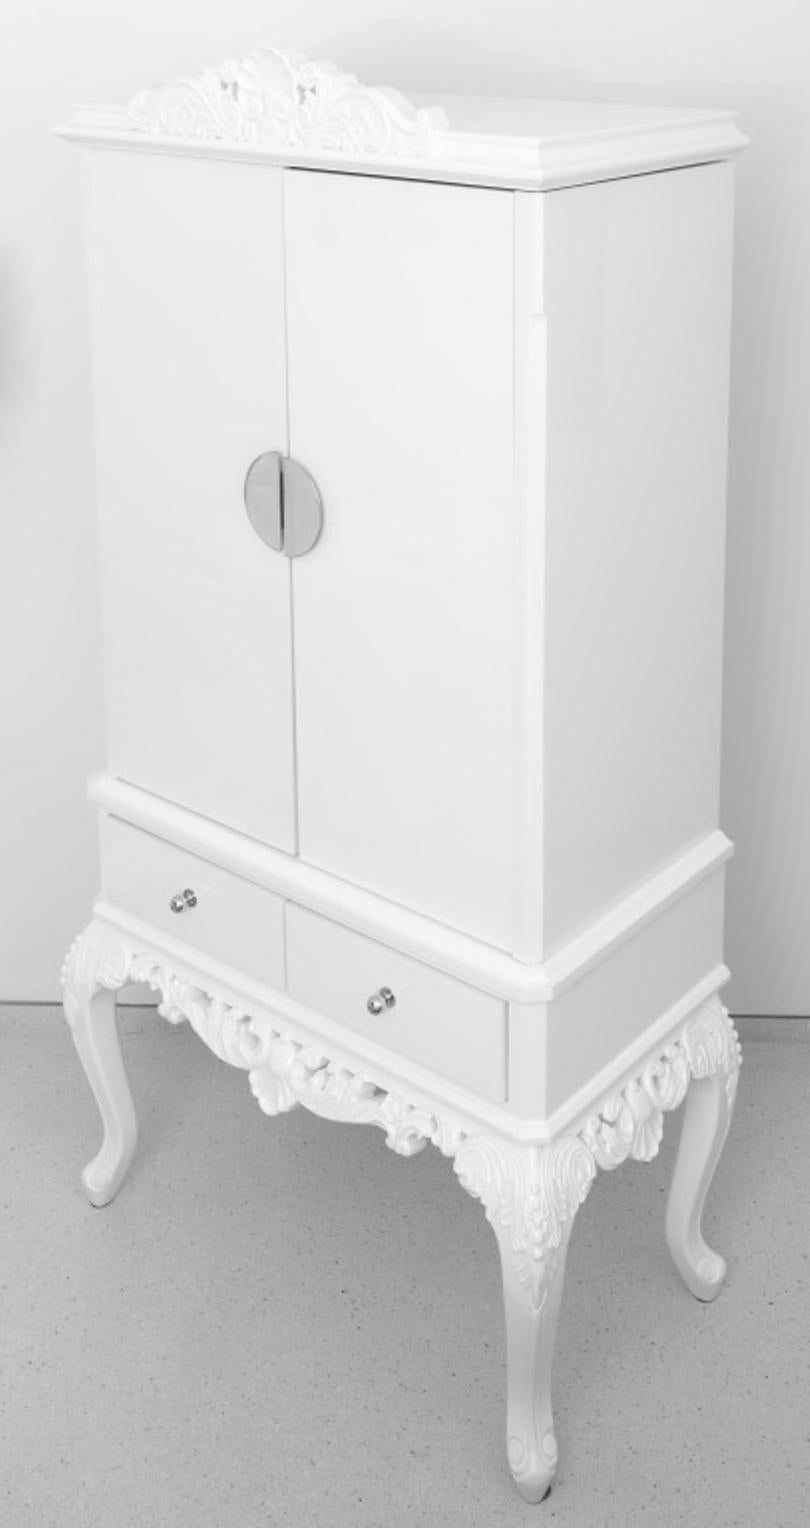 Hollywood Regency style white lacquer cabinet on stand. This cabinet features two shelves and interior long drawer as well as two exterior drawers on base. In good condition. Wear consistent with age and use. Dimensions: 73